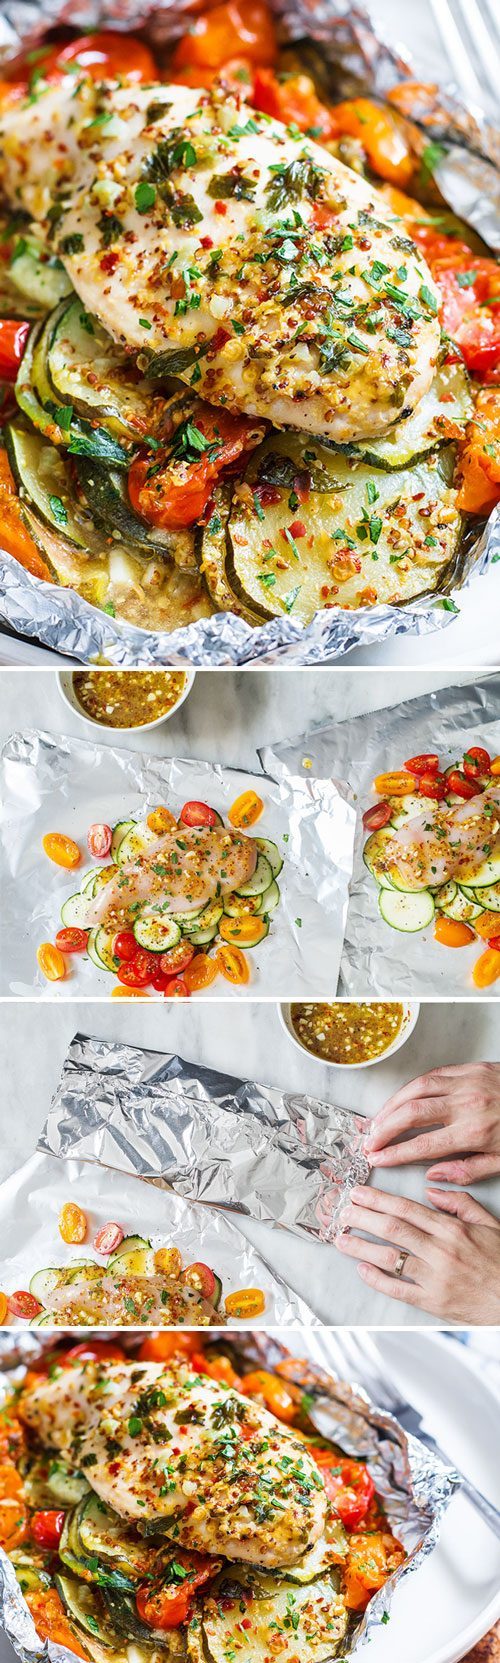 Chicken in Foil Packets – #eatwell101 #recipe #chicken #dinner - So NOURISHING and packed with TONS OF FLAVOR! Chicken breasts cooked in foil packets are amazingly moist and tender.